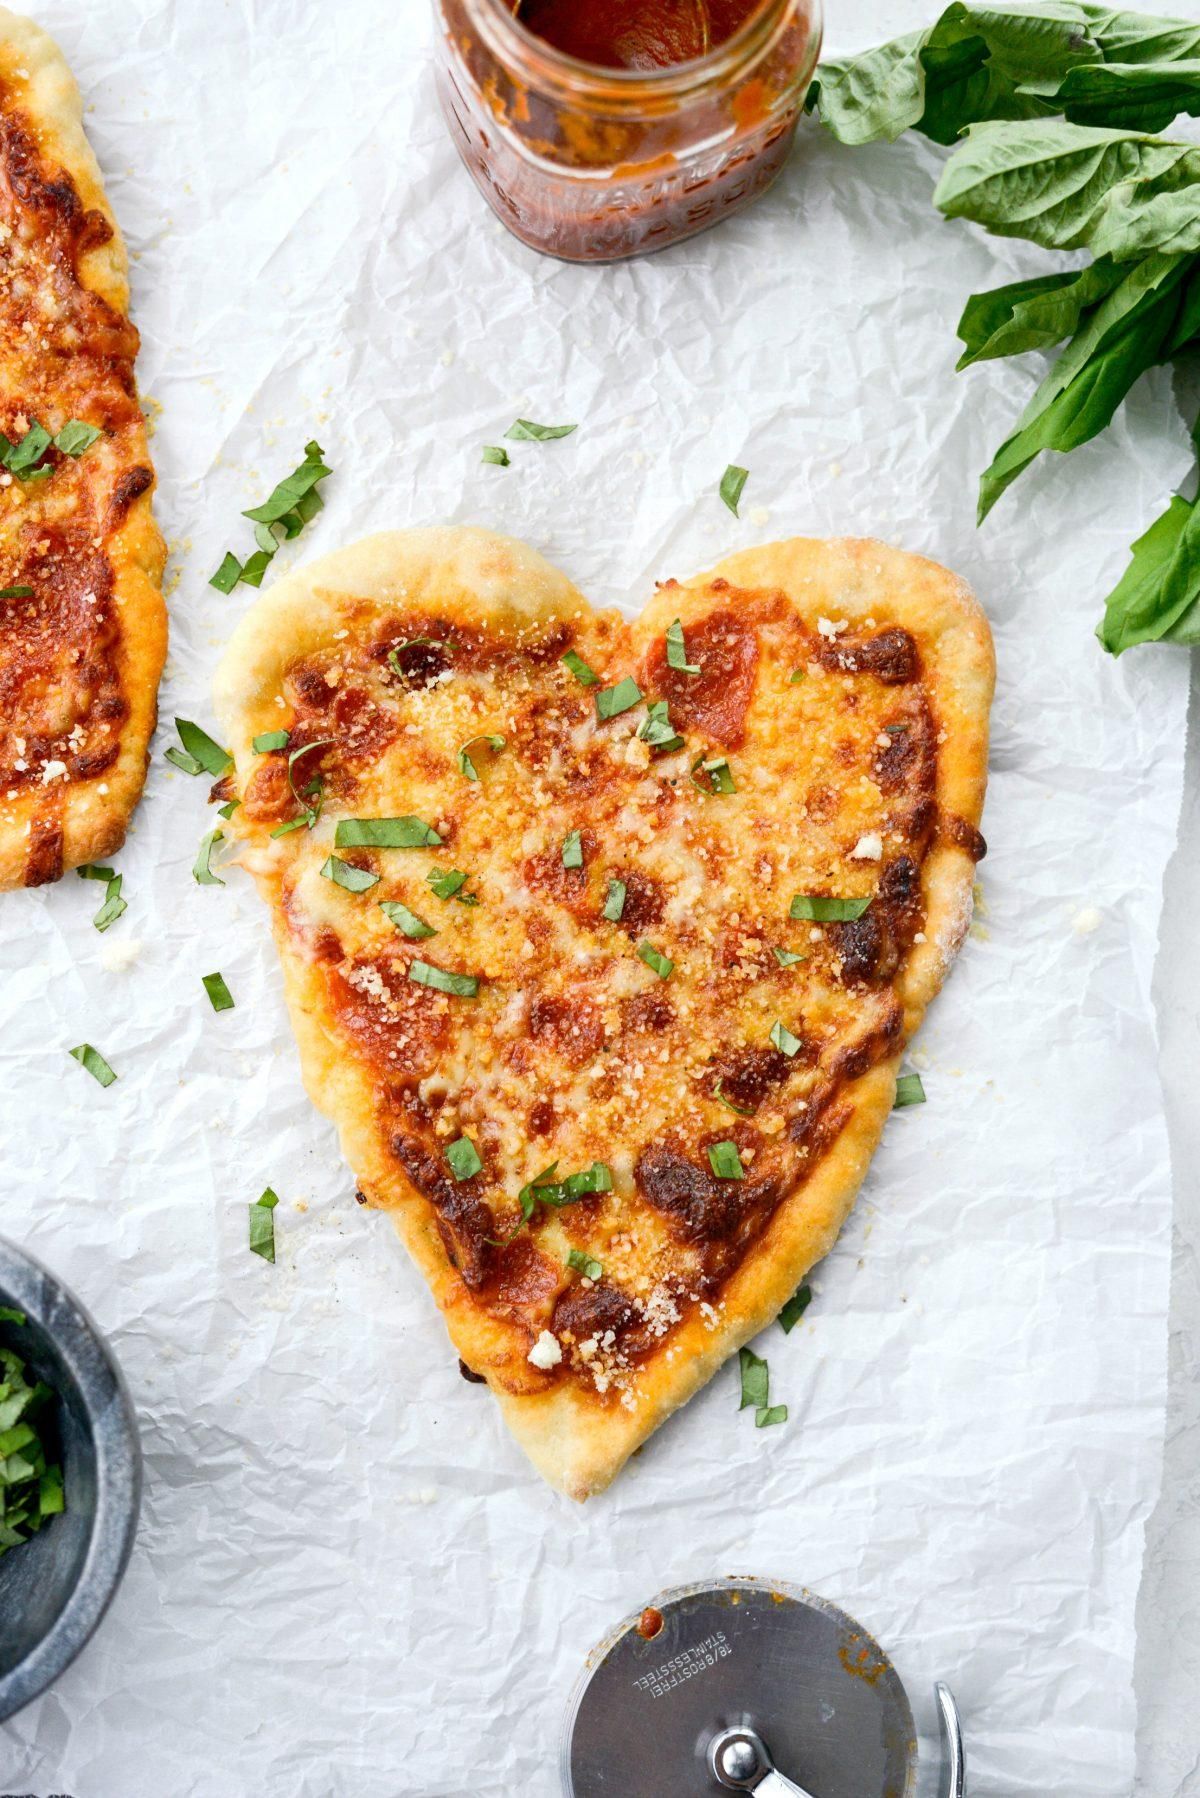 Heart-Shaped Pizza Recipe - How To Make At Home Or Order In - Brit + Co